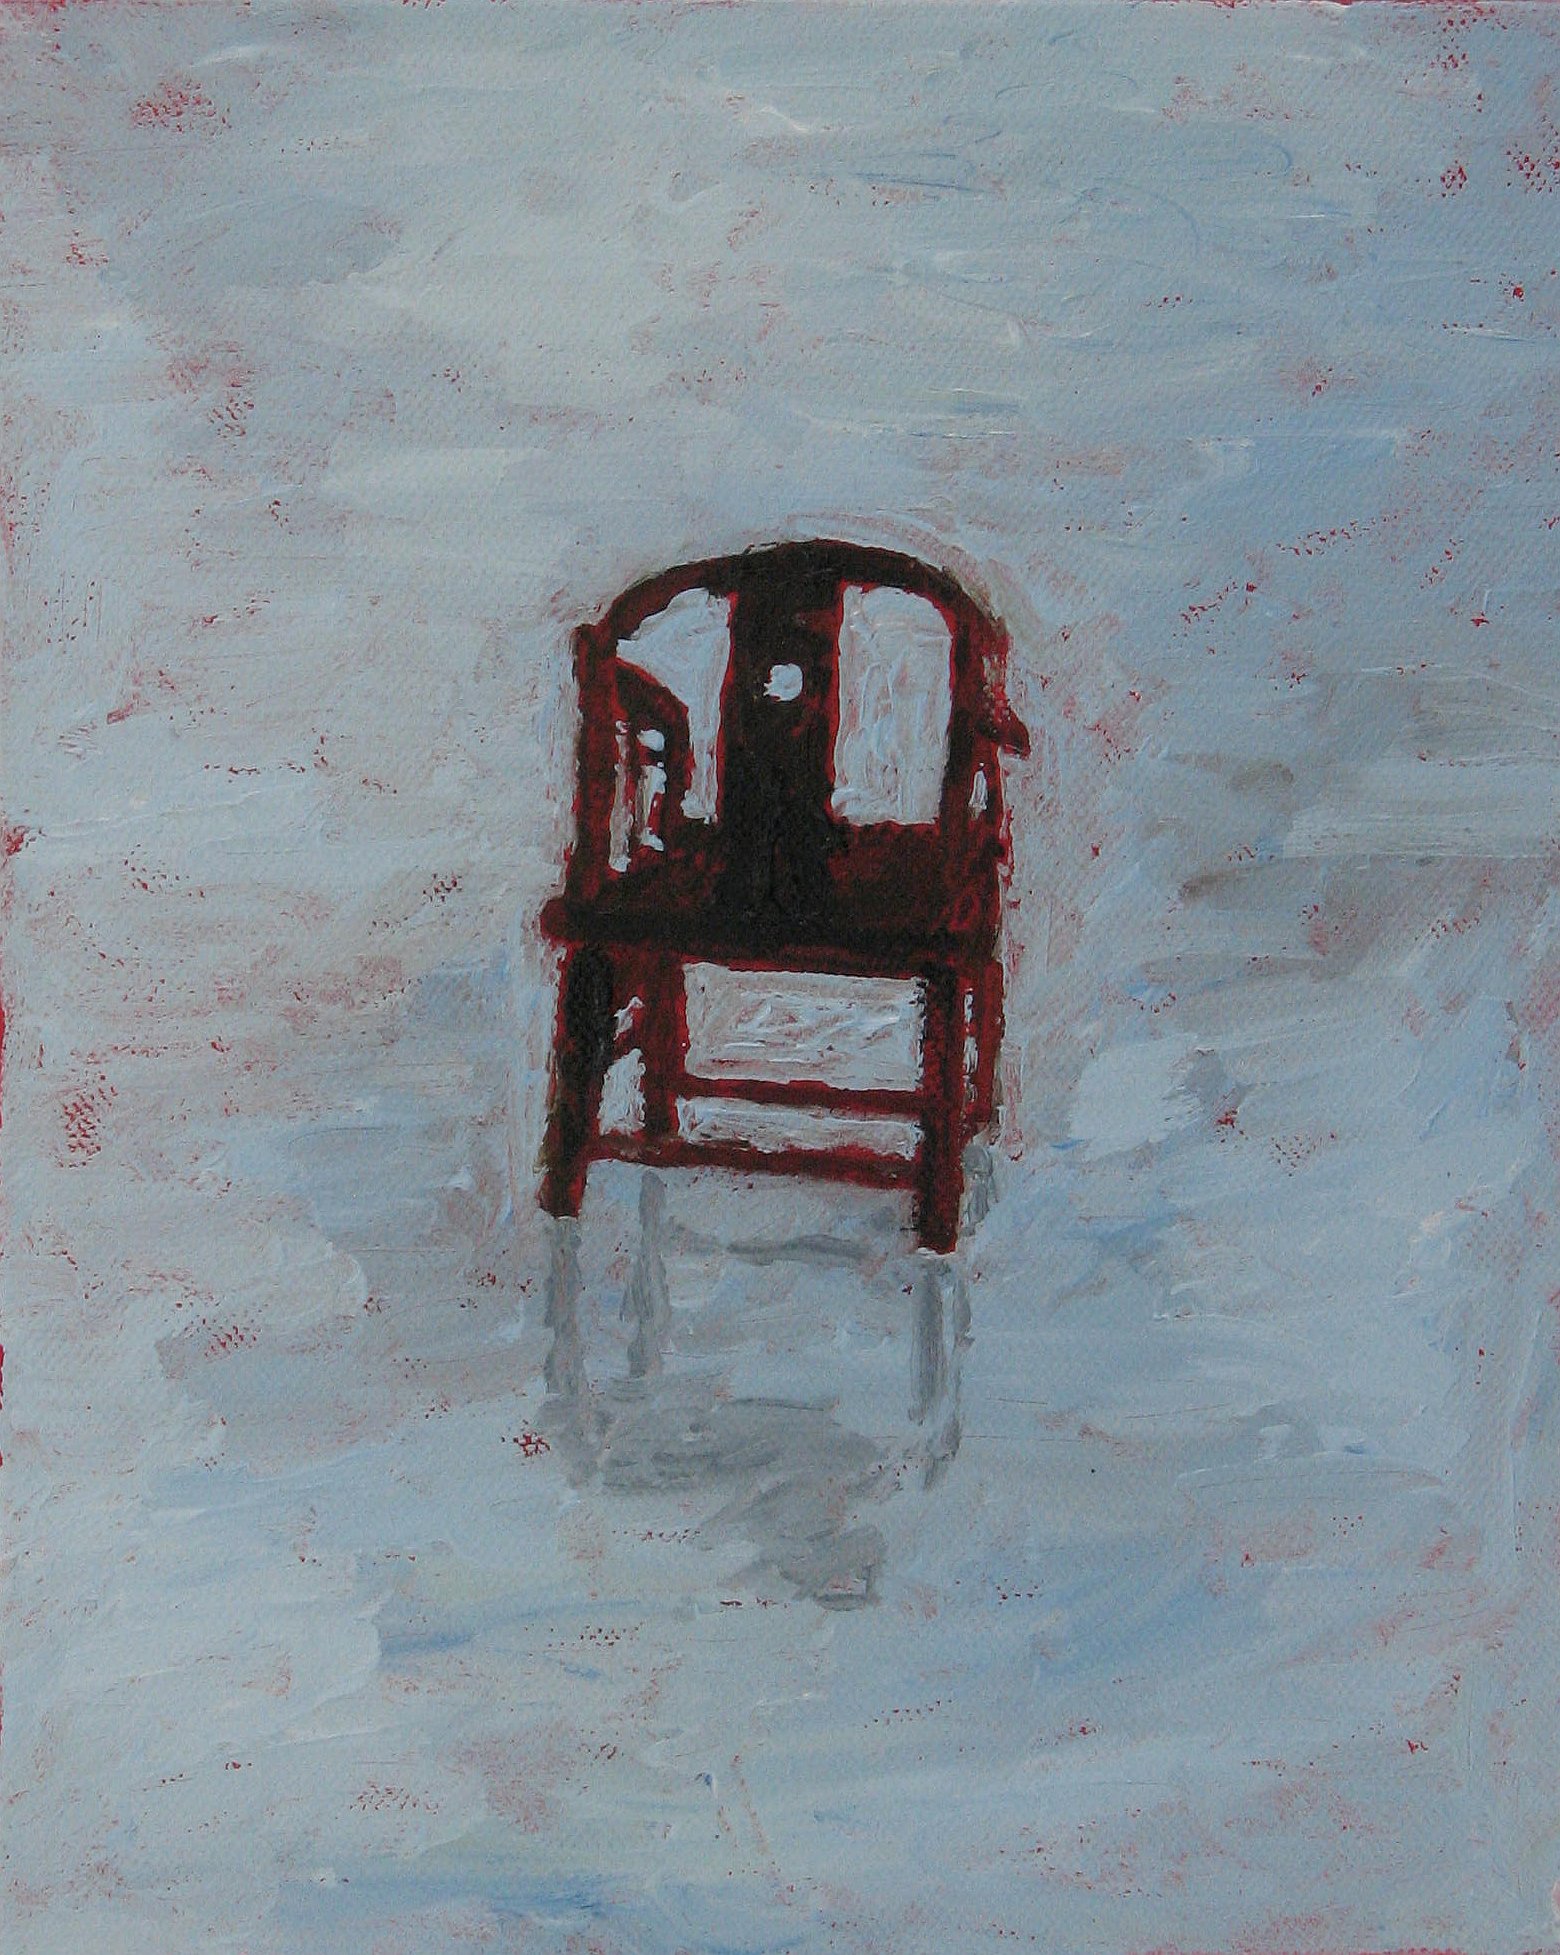 Click the image for a view of: Chair 9. 2008. Oil on canvas. 250 X 200mm